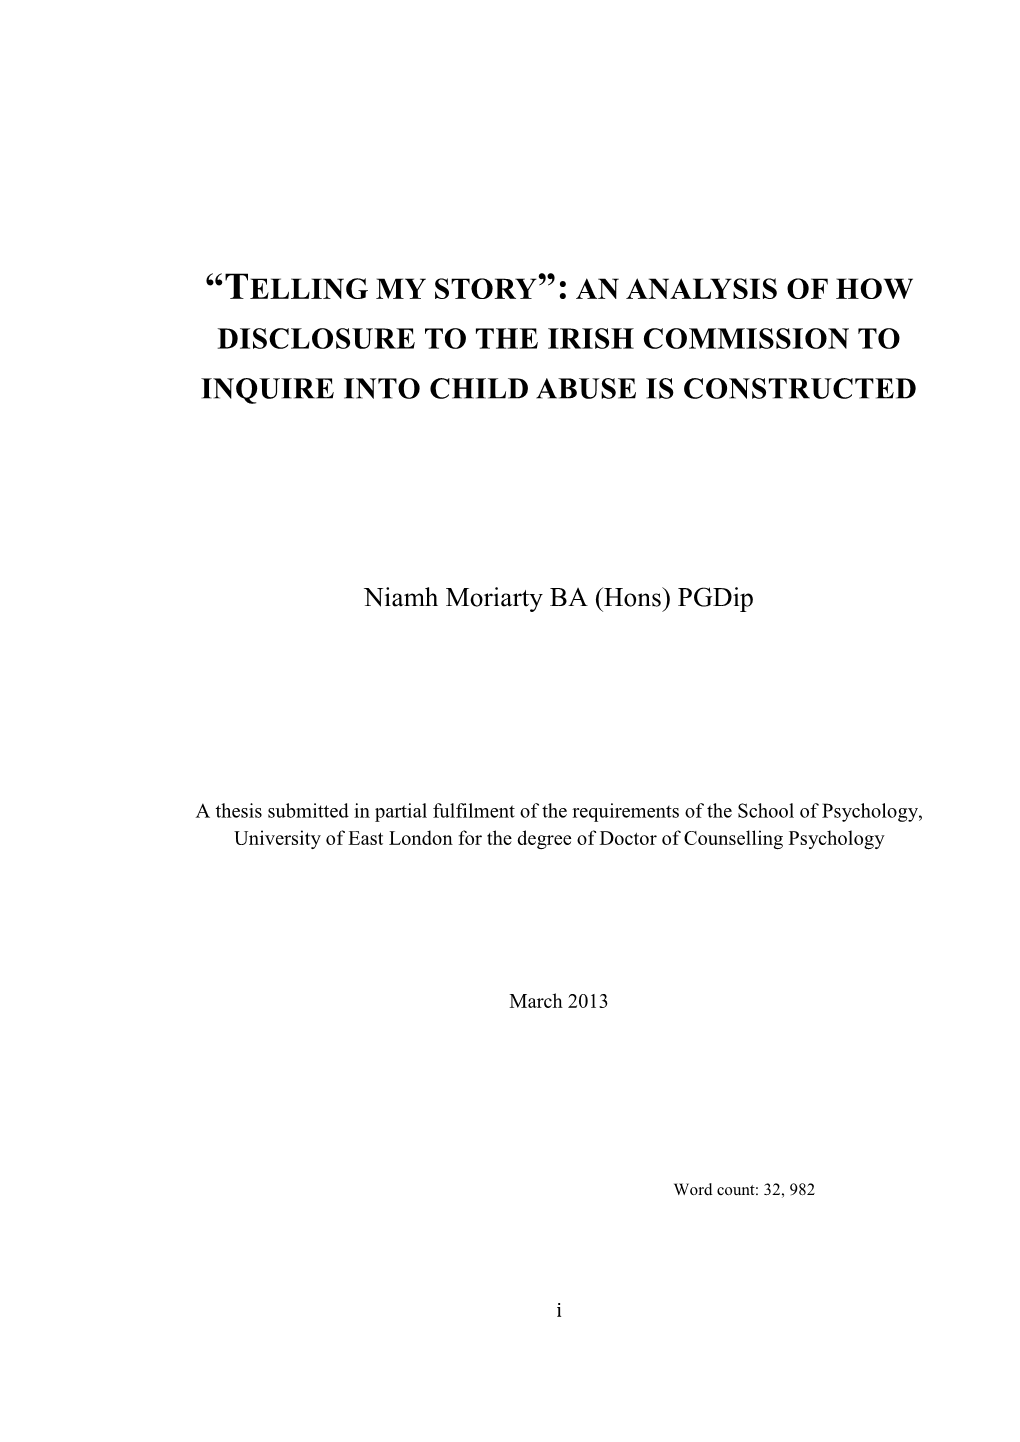 An Analysis of How Disclosure to the Irish Commission to Inquire Into Child Abuse Is Constructed